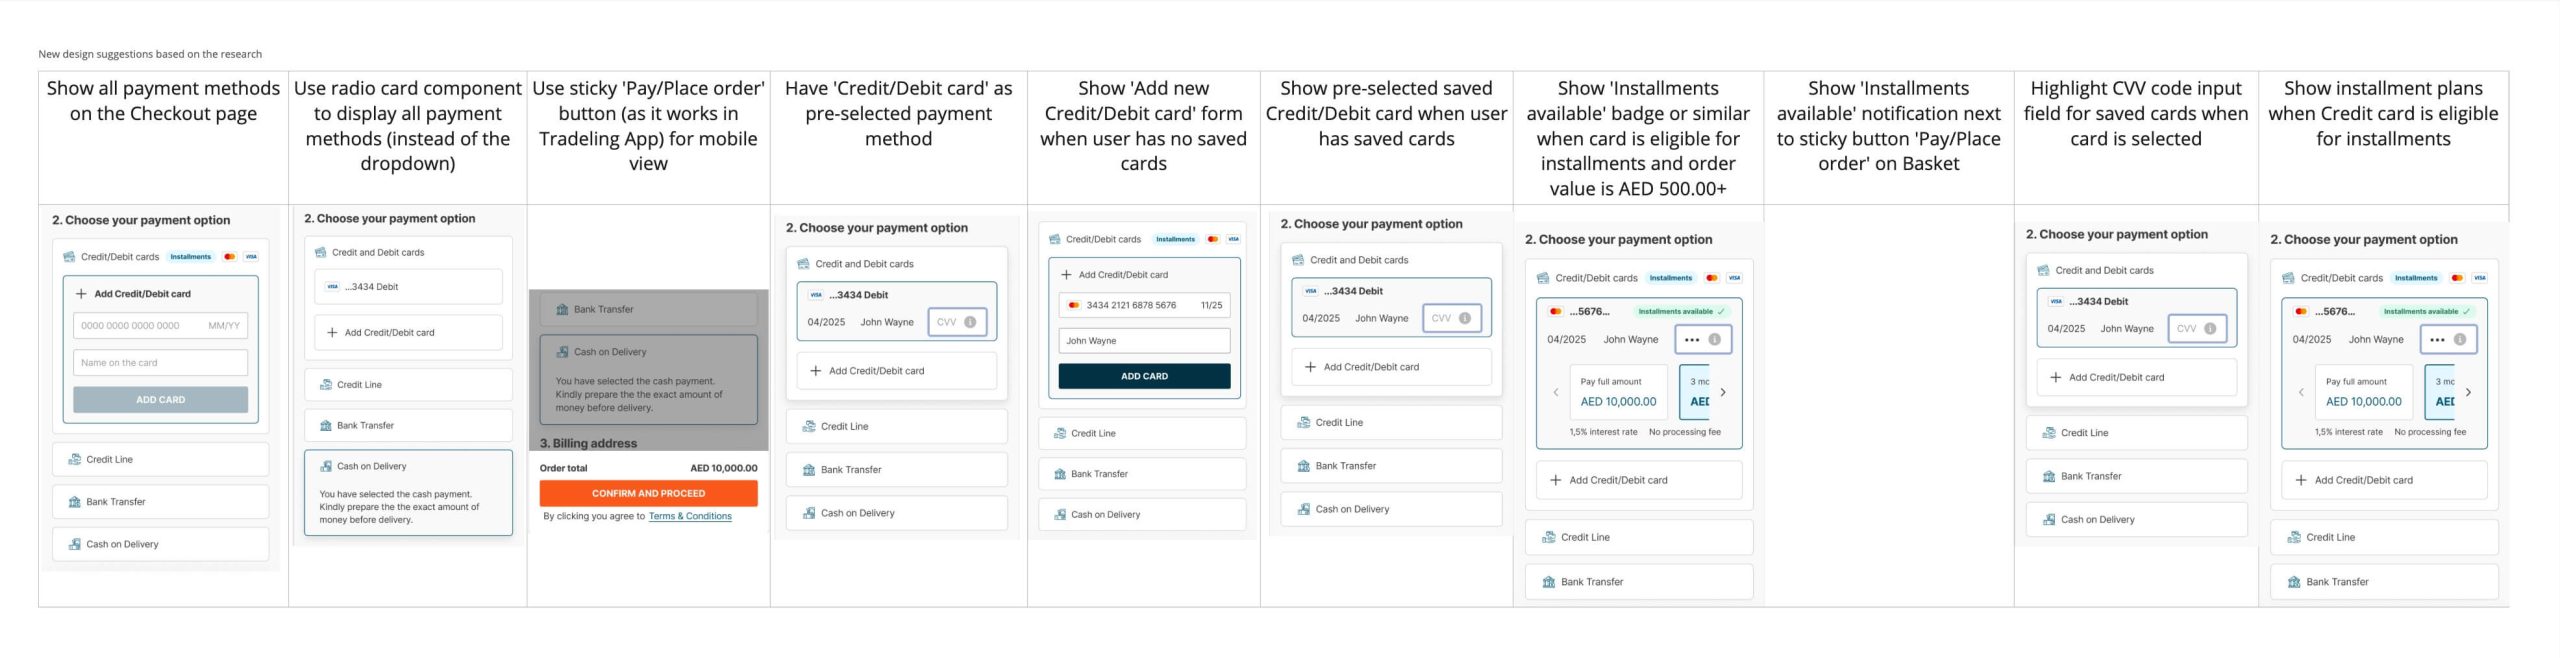 Illustrated list of suggestions for payment step in checkout after benchmarking